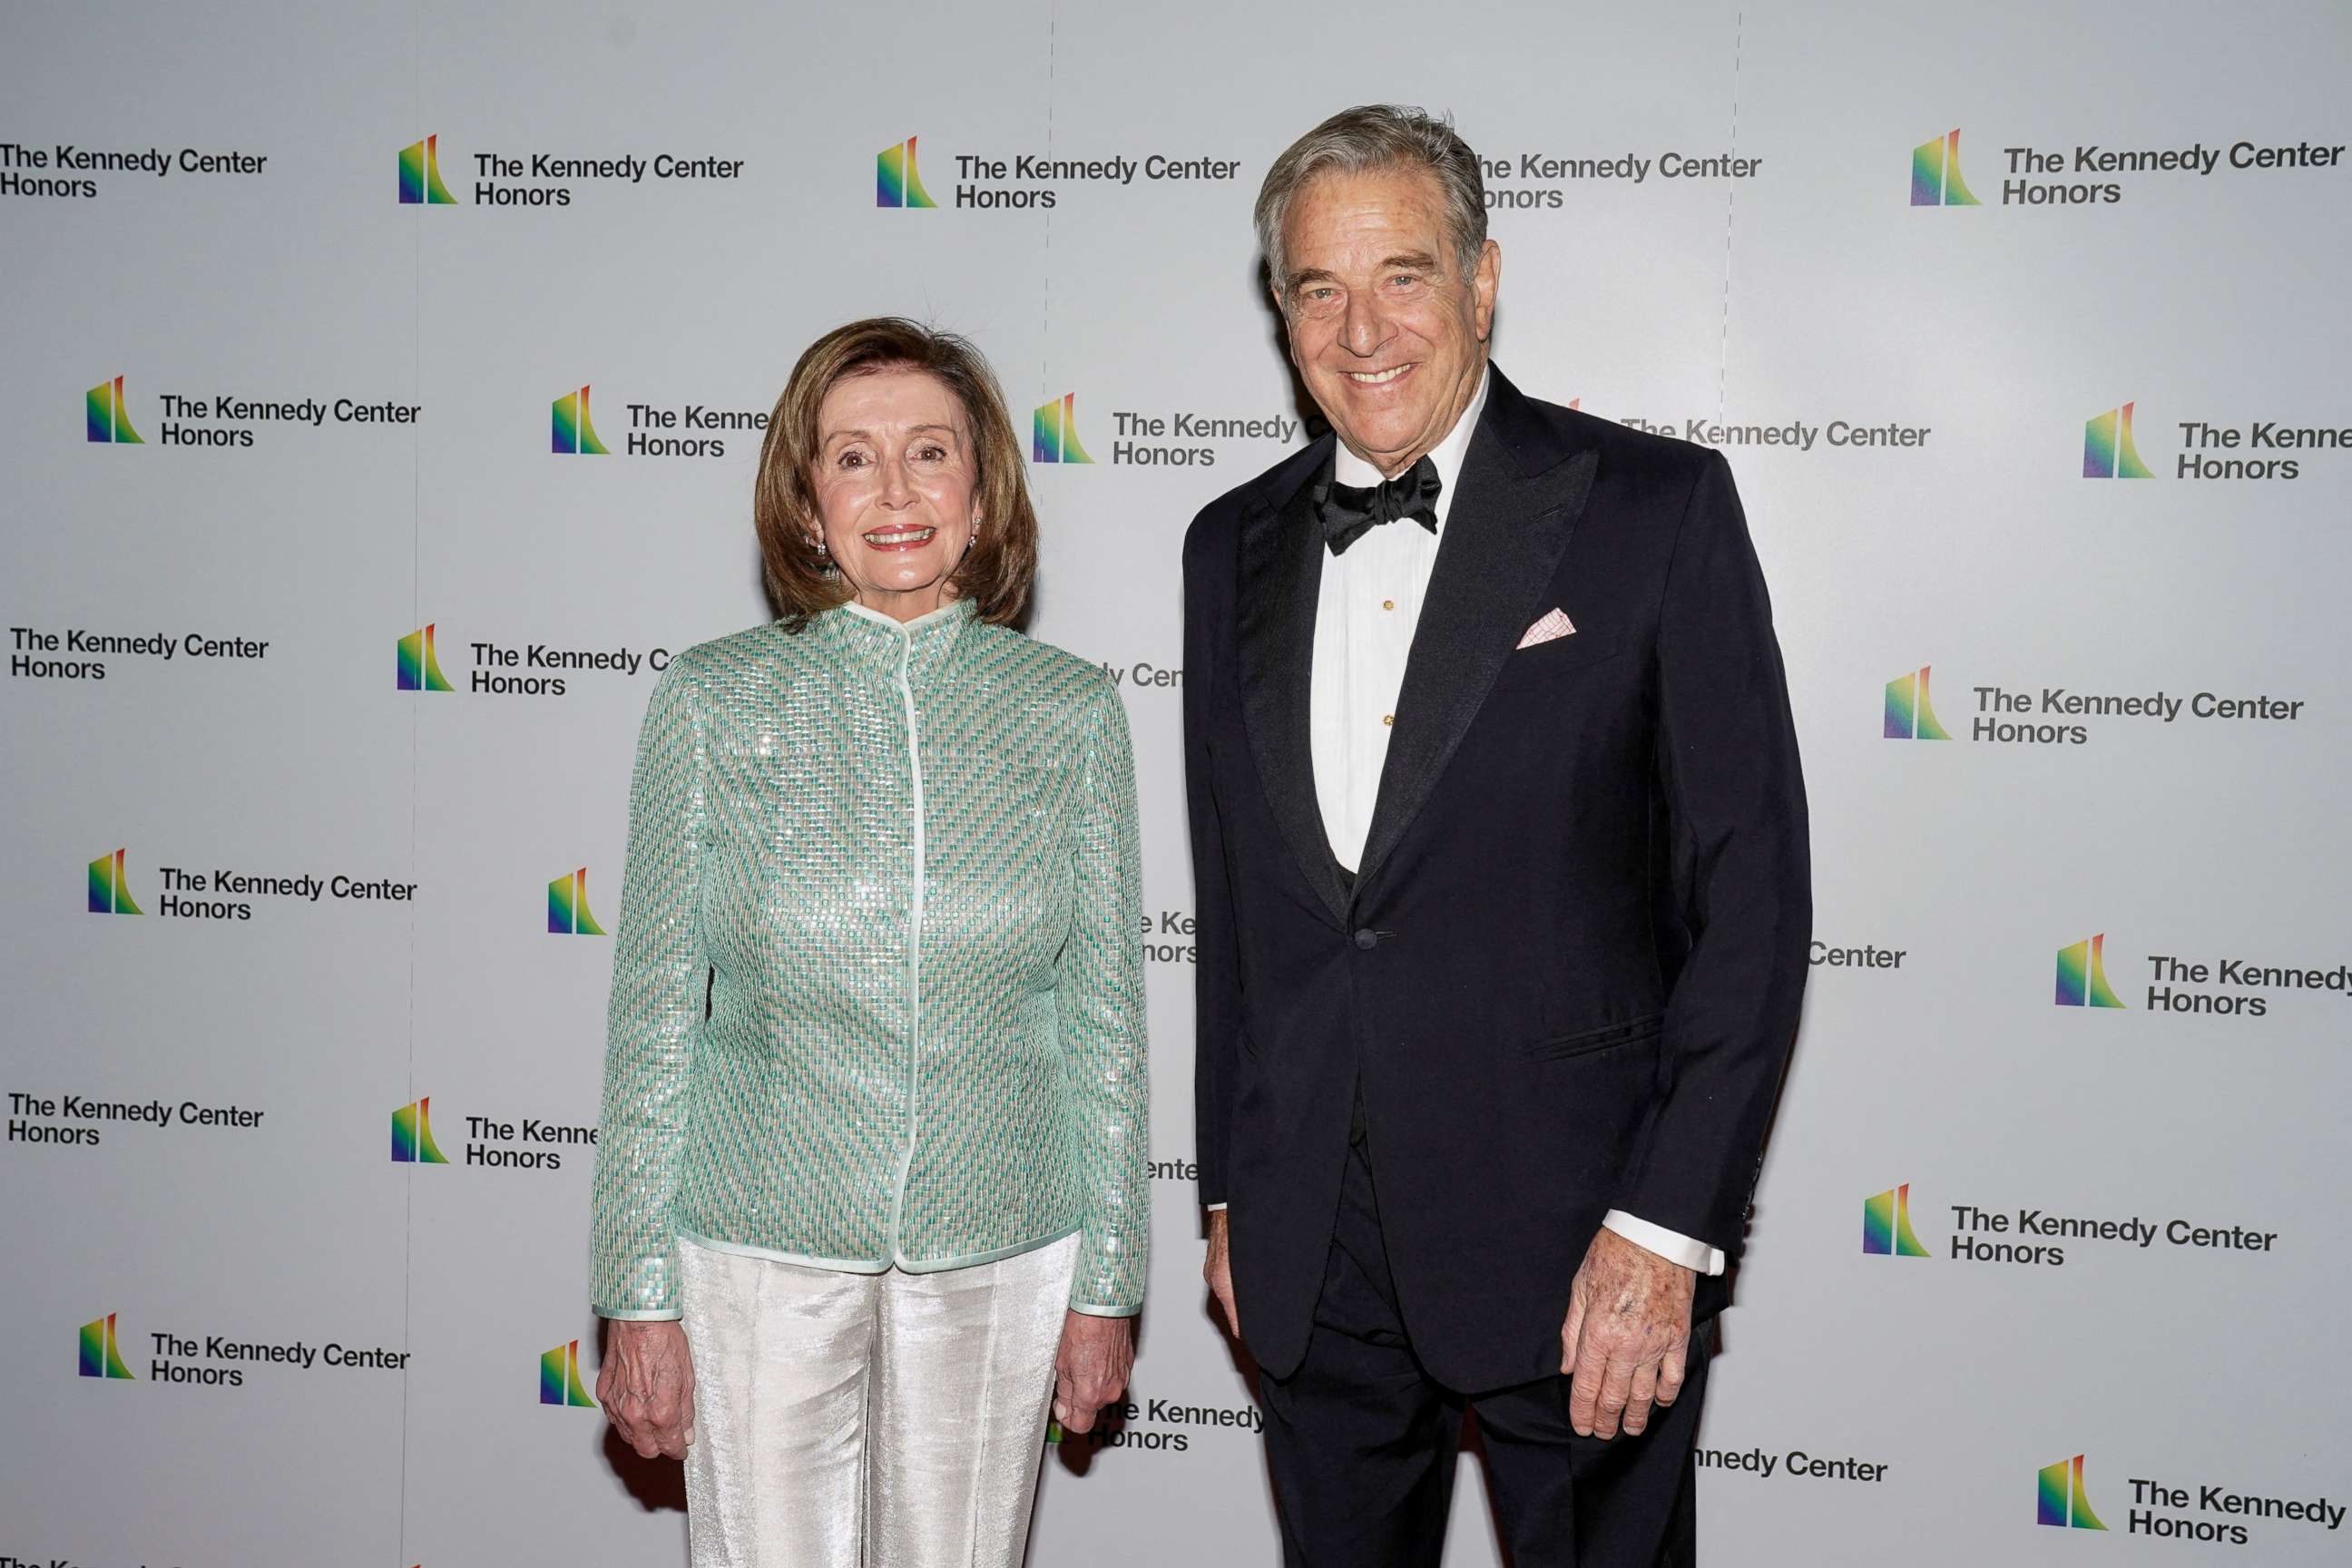 FILE PHOTO: House Speaker Nancy Pelosi, D-Calif., and her husband Paul Pelosi arrive for the formal Artist's Dinner honoring the recipients of the 44th Annual Kennedy Center Honors at the Library of Congress in Washington, D.C., on Dec. 4, 2021.